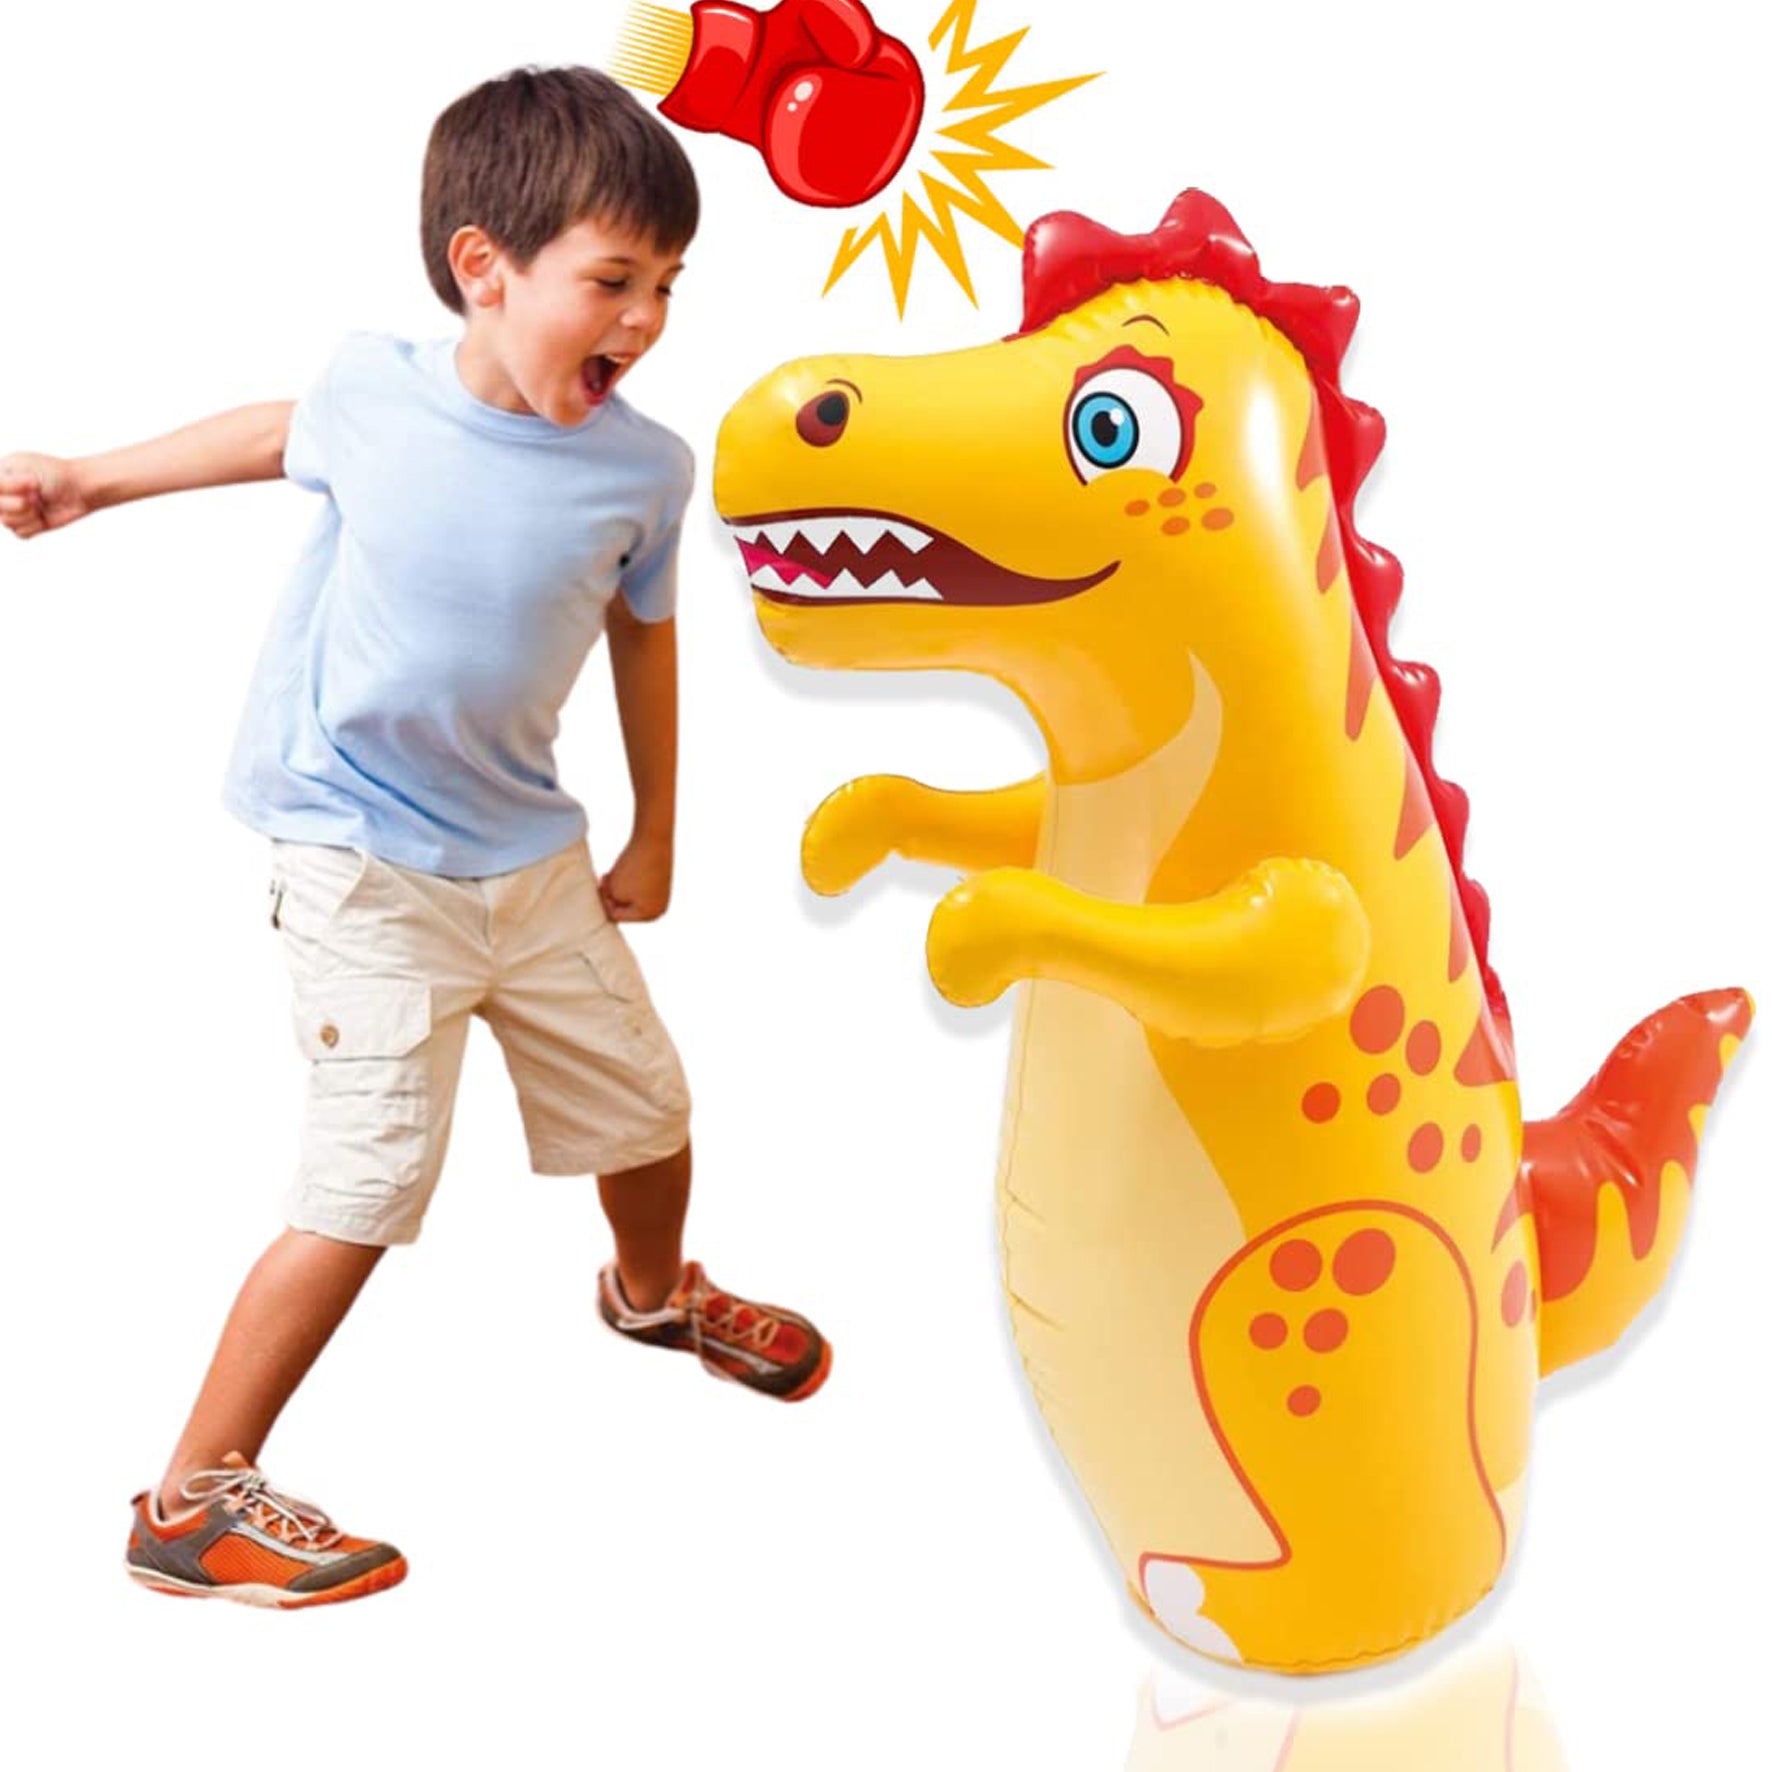 Dragon Hit Me Toy 3-D Inflatable Animal Toy | Water Base and Air Base for Toddlers | PVC Punching Bag for Kids | Activity Toy for Kids Age 3 +.